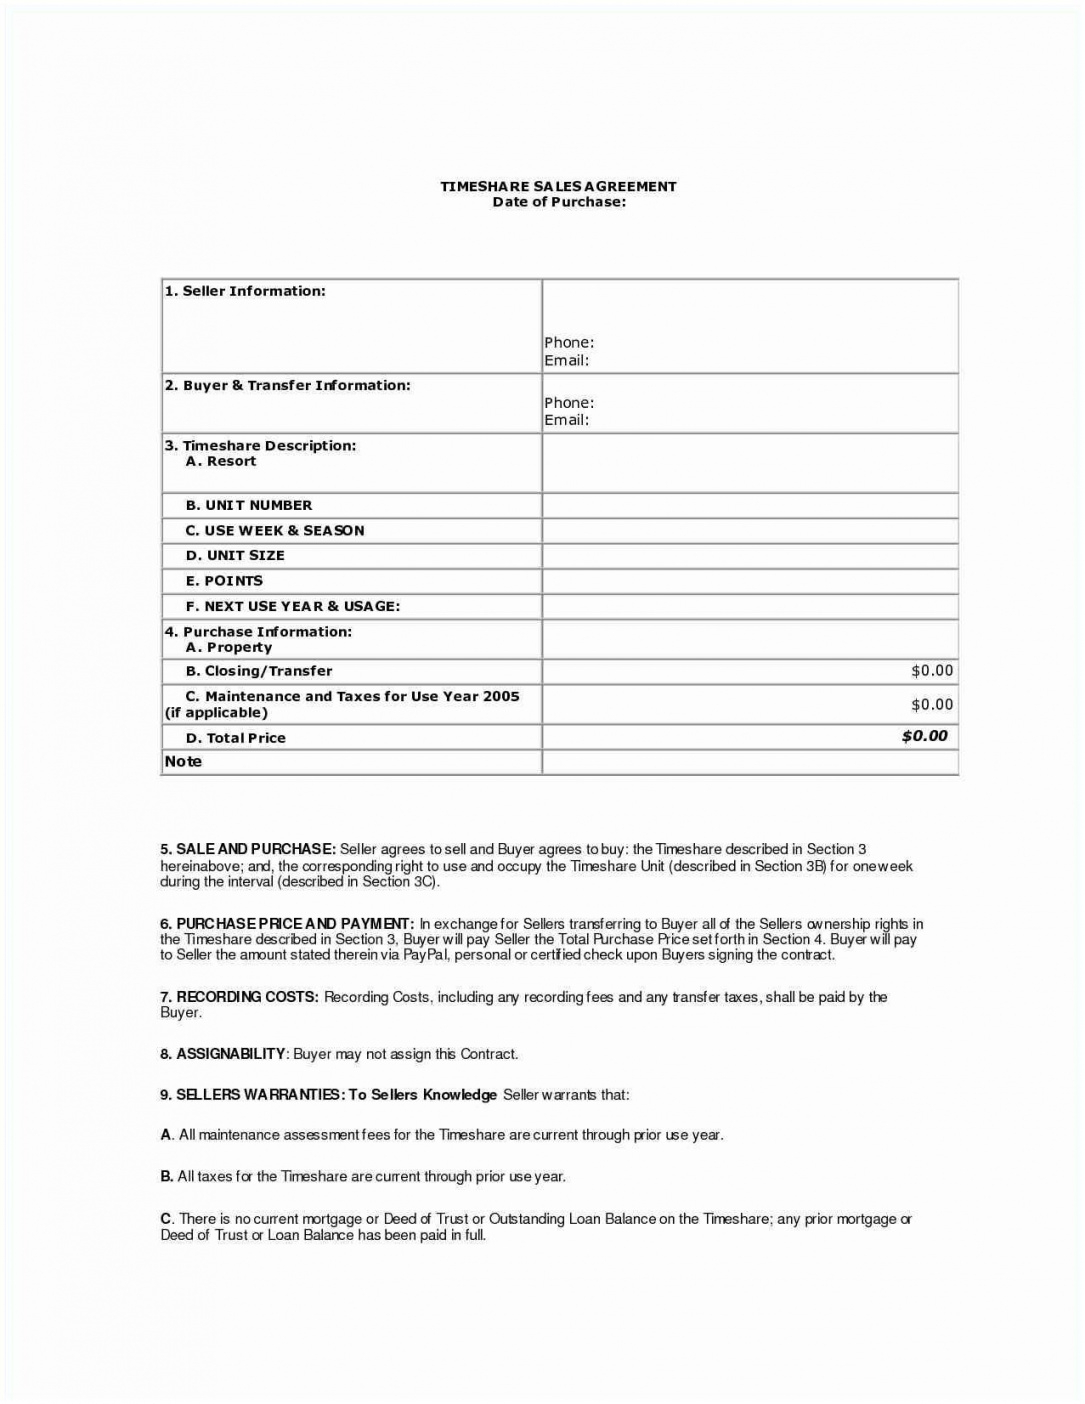 Shared Equity Financing Agreement Free Shared Equity Financingt Sample Form Template Loan With